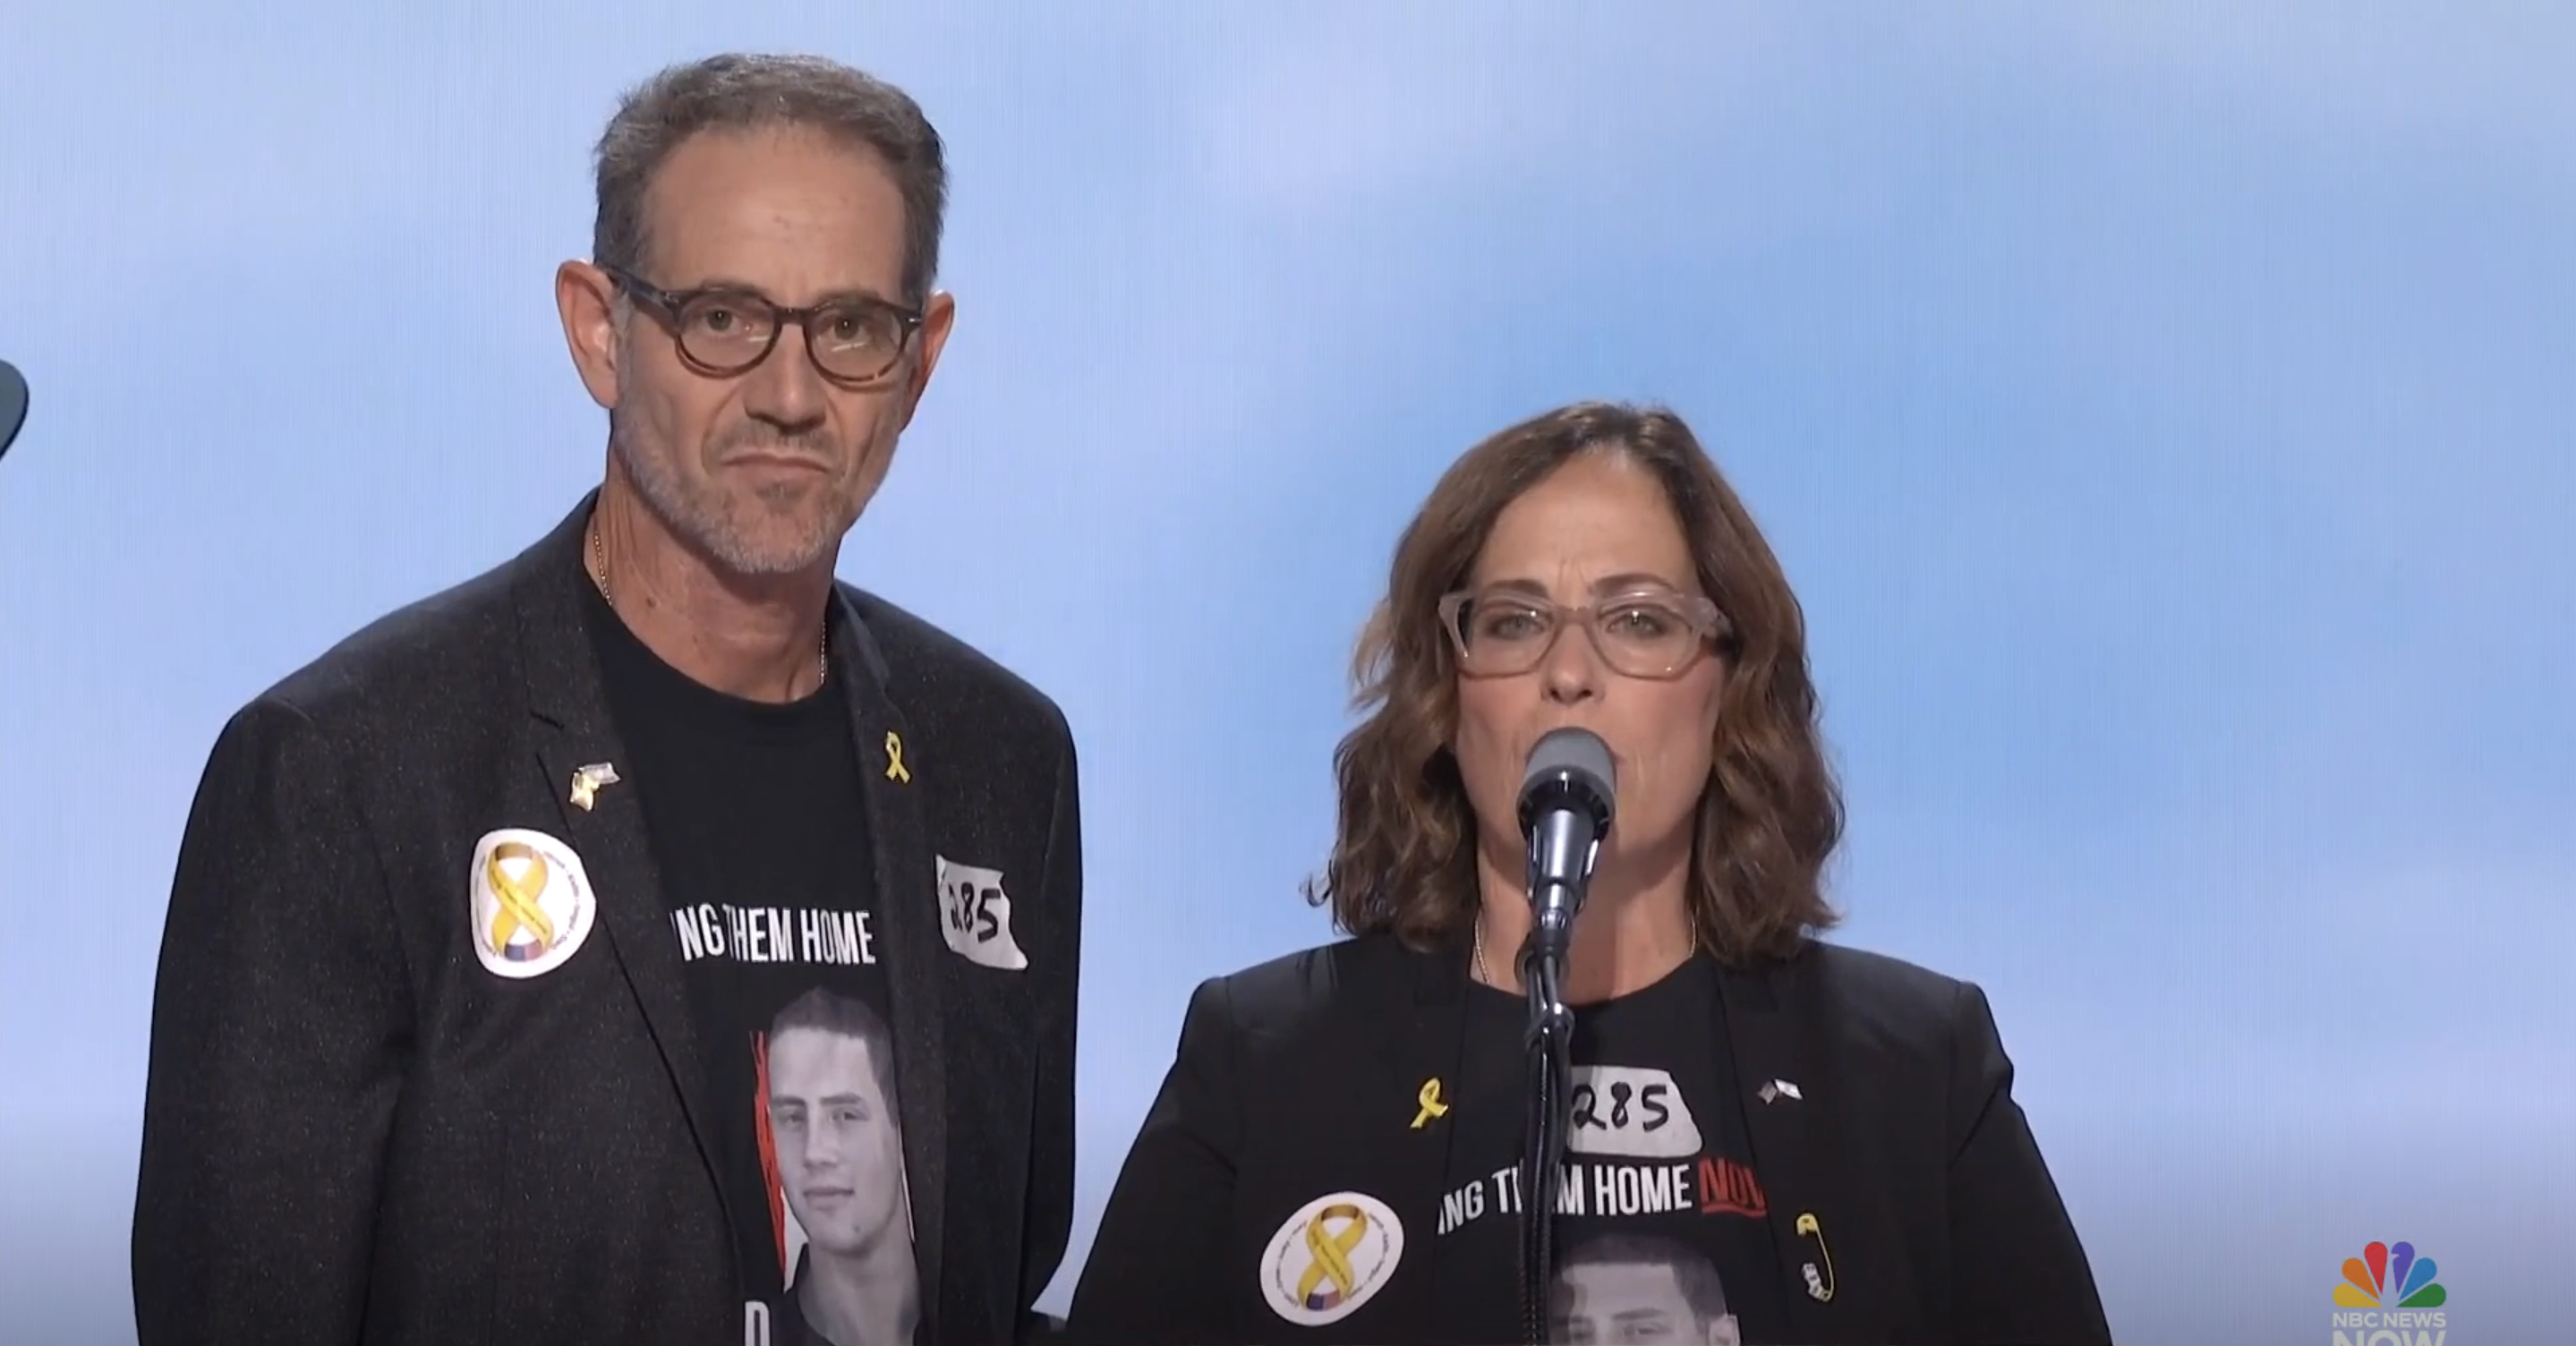 ‘Bring them home’: Family of American citizen held hostage in Gaza speaks at RNC